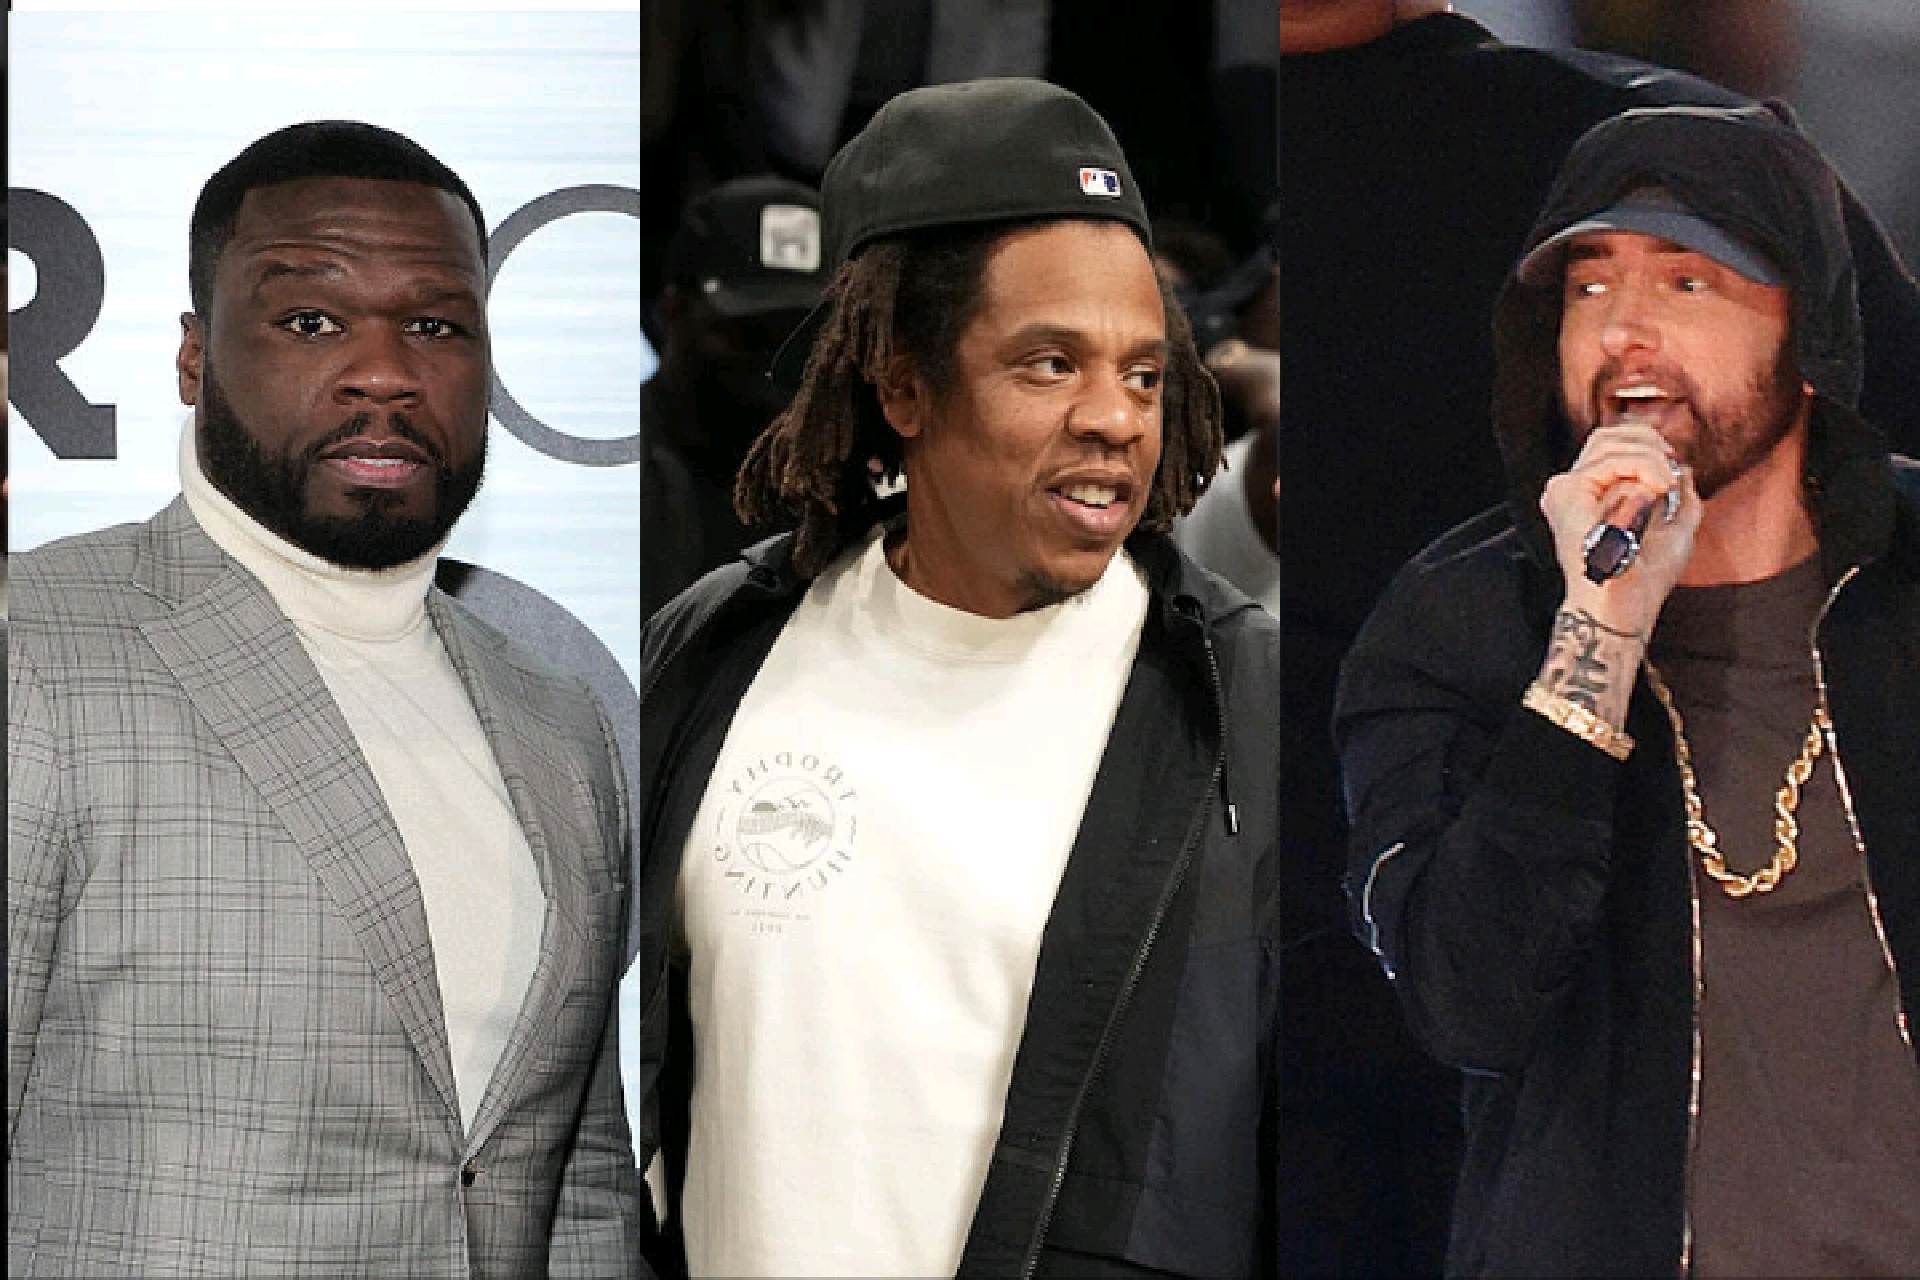 50 Cent Don’t Believe Jay-Z’s Impact Is Bigger Than Eminem